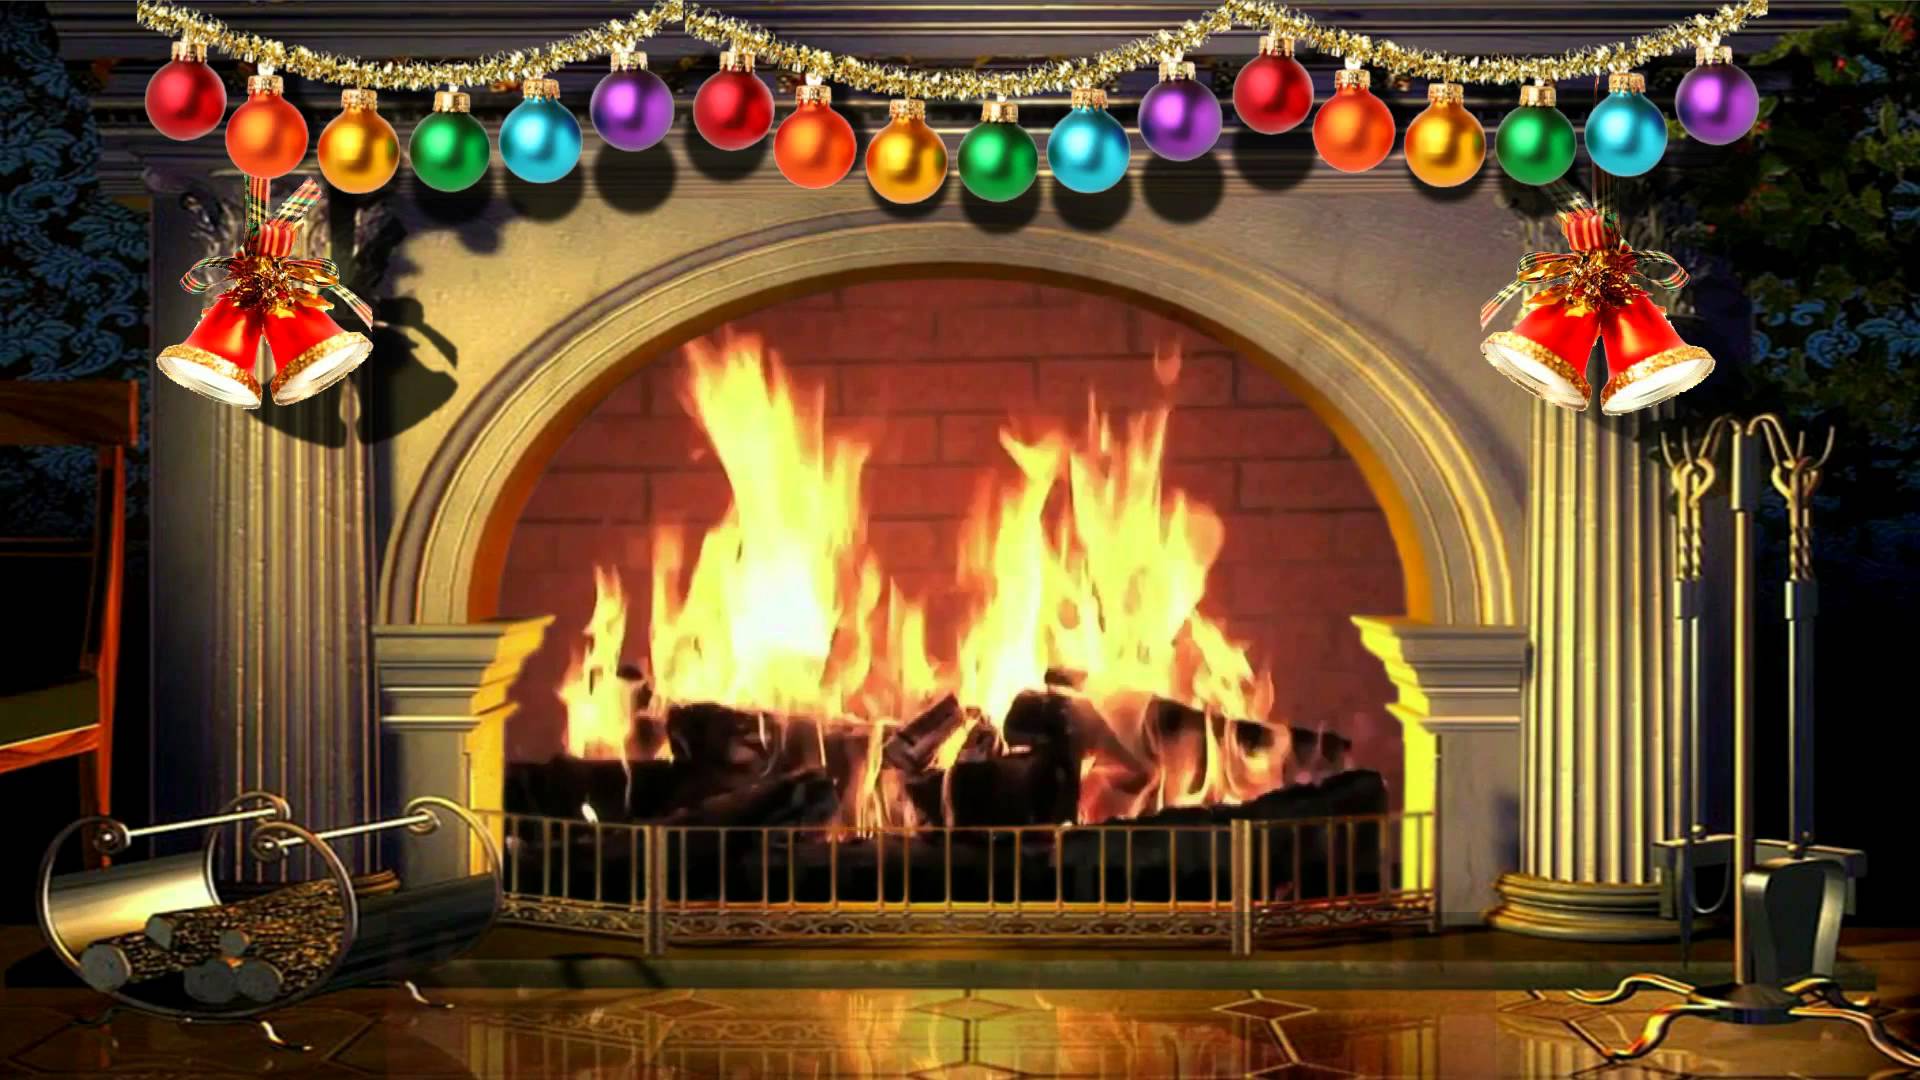 Free download Virtual Christmas Fireplace Free background video ...